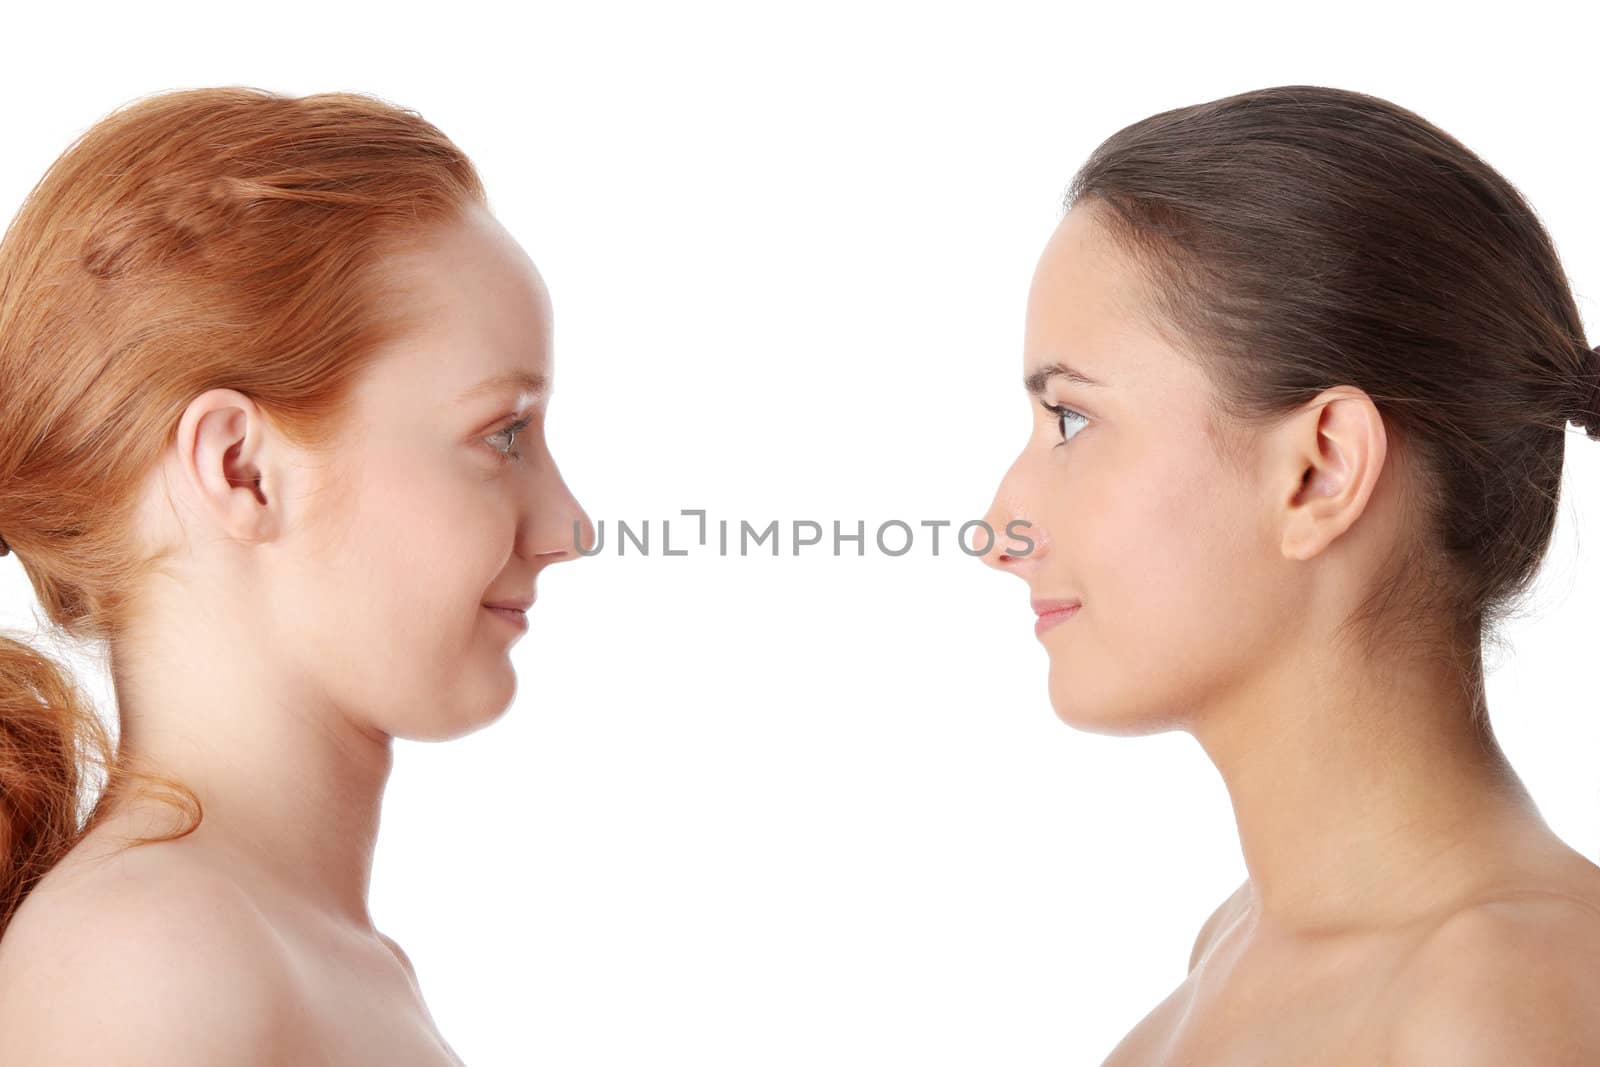 Spa - portrait of two woman - redhead and brunette - isolated on white background